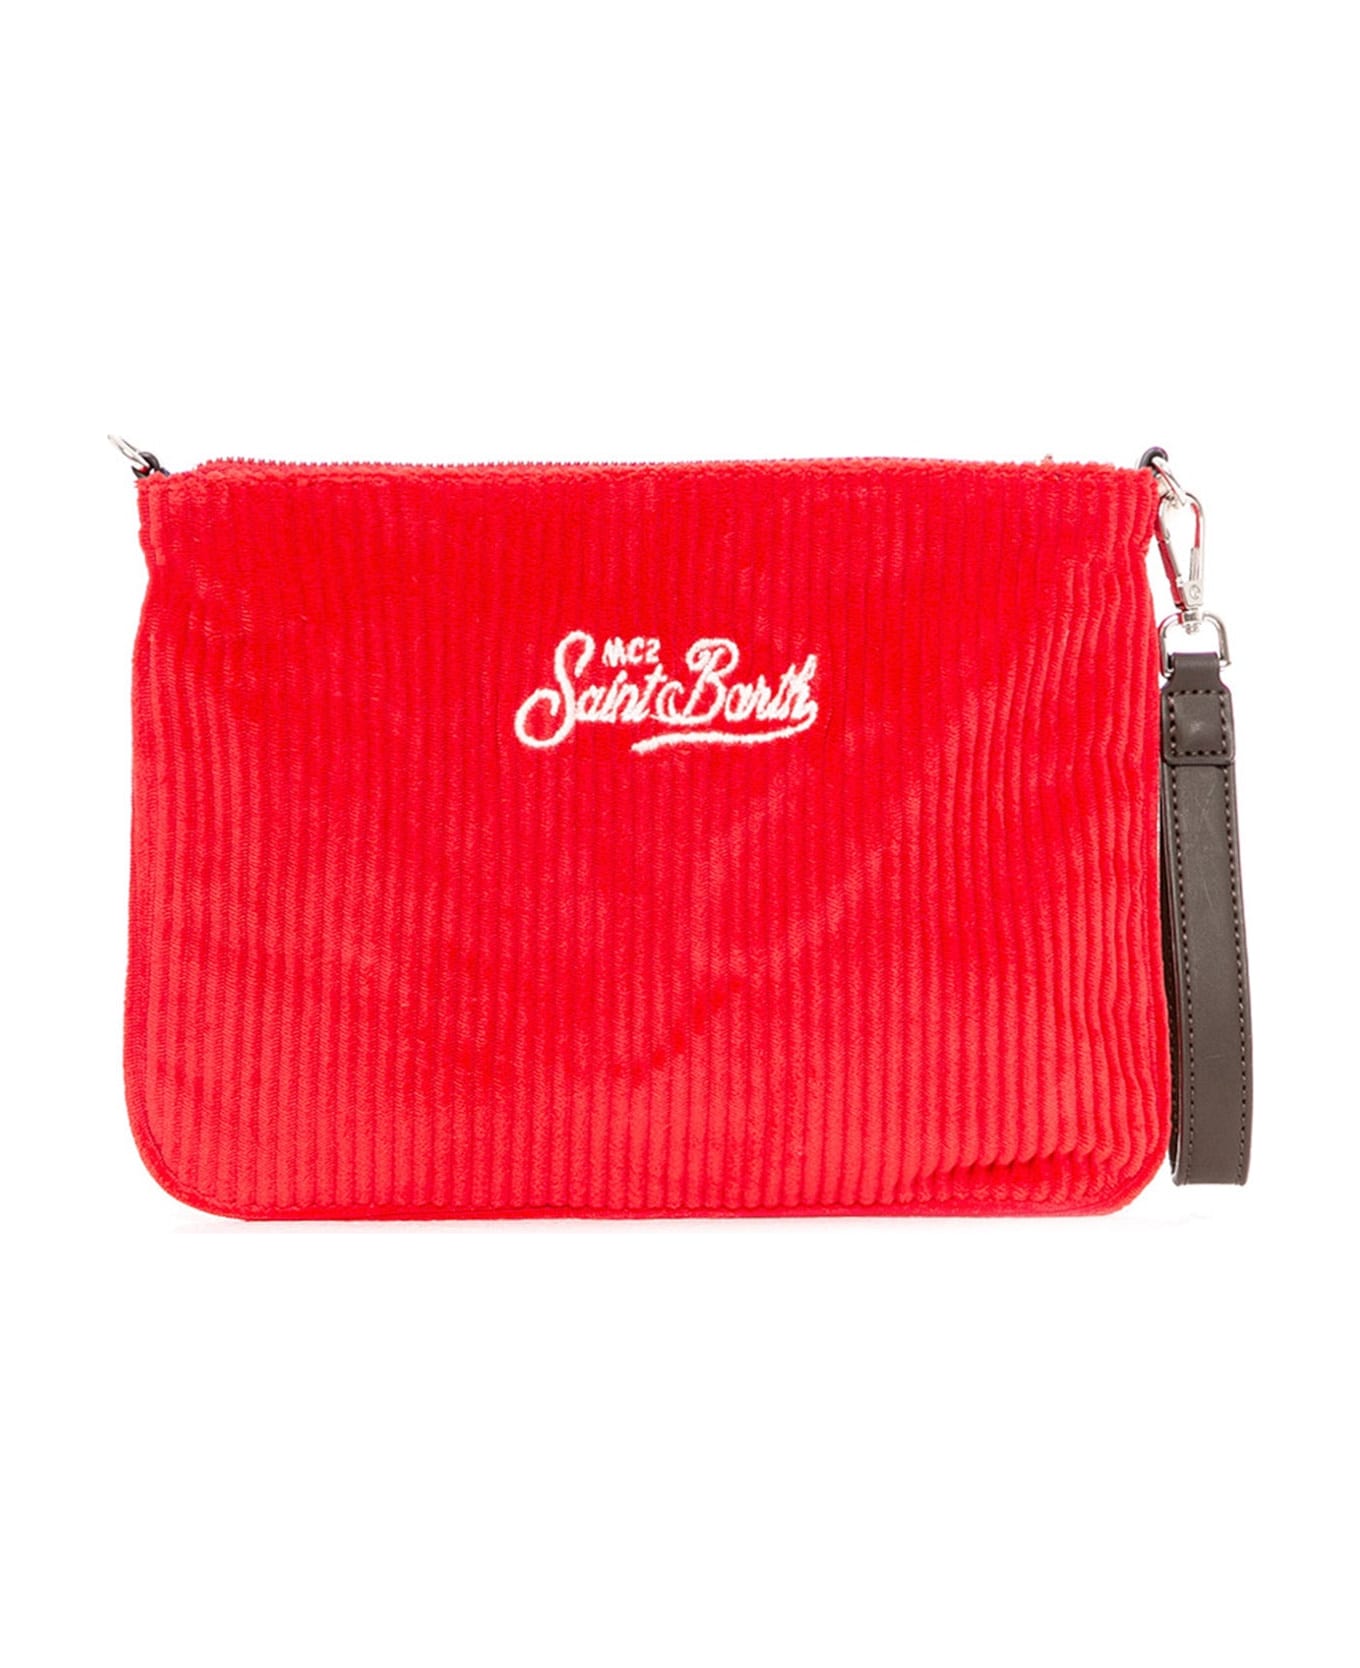 MC2 Saint Barth Parisienne Red Corduroy Cross-body Pouch Bag - RED トラベルバッグ